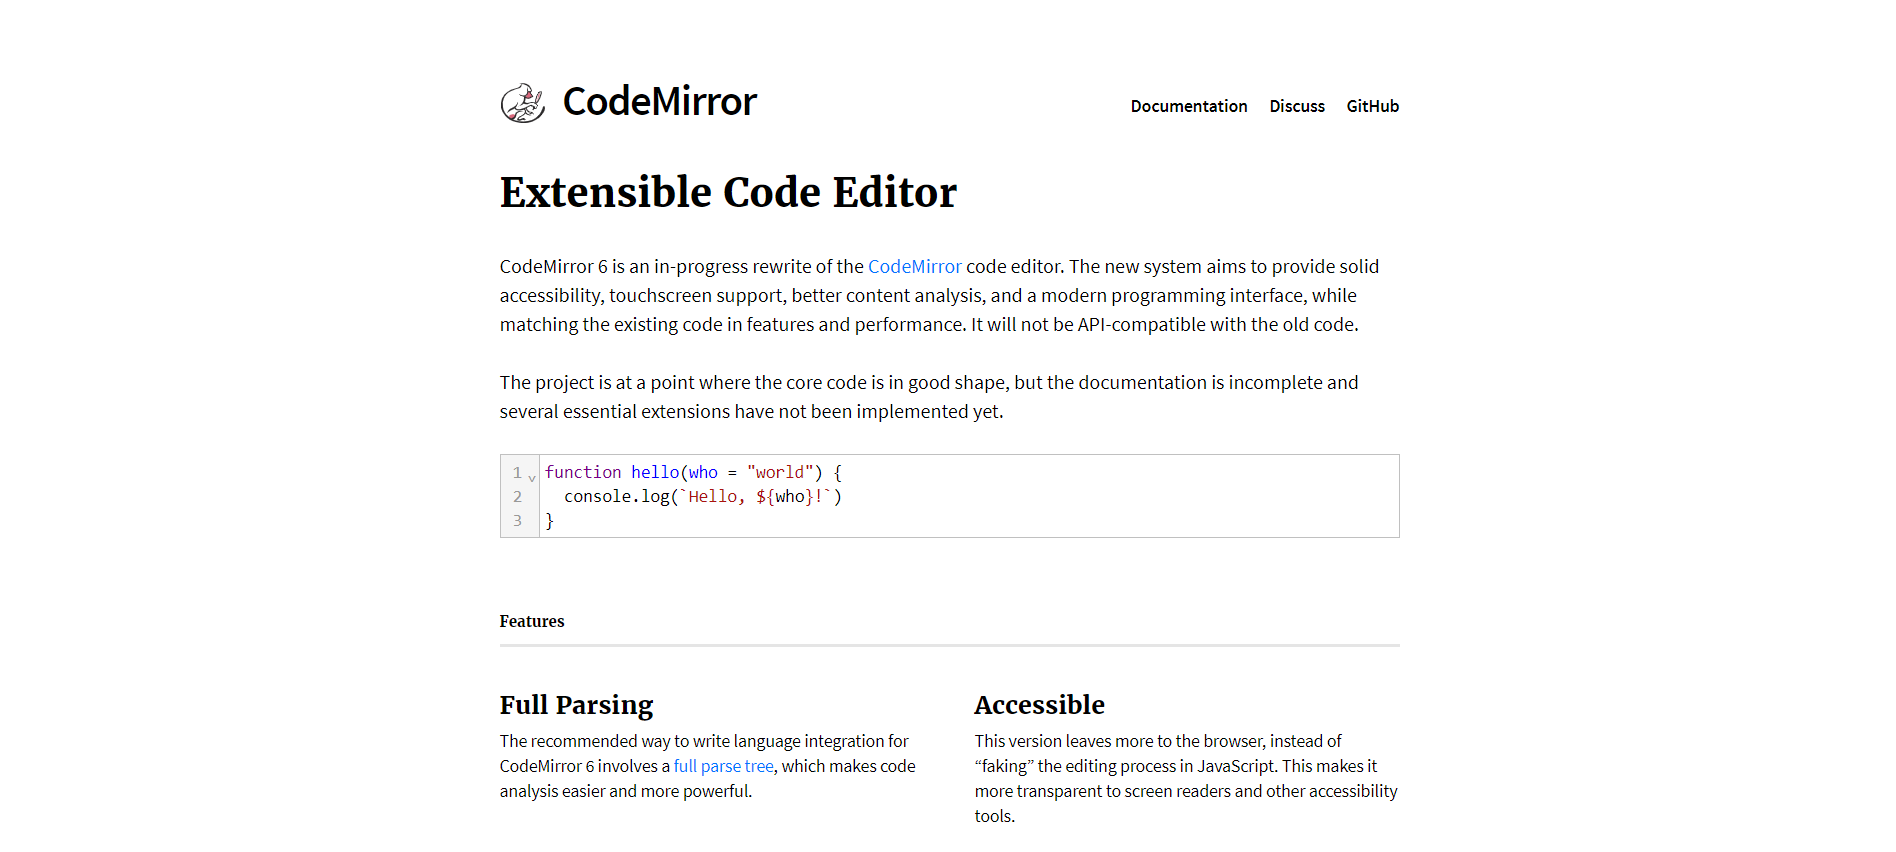 CodeMirror official landing page